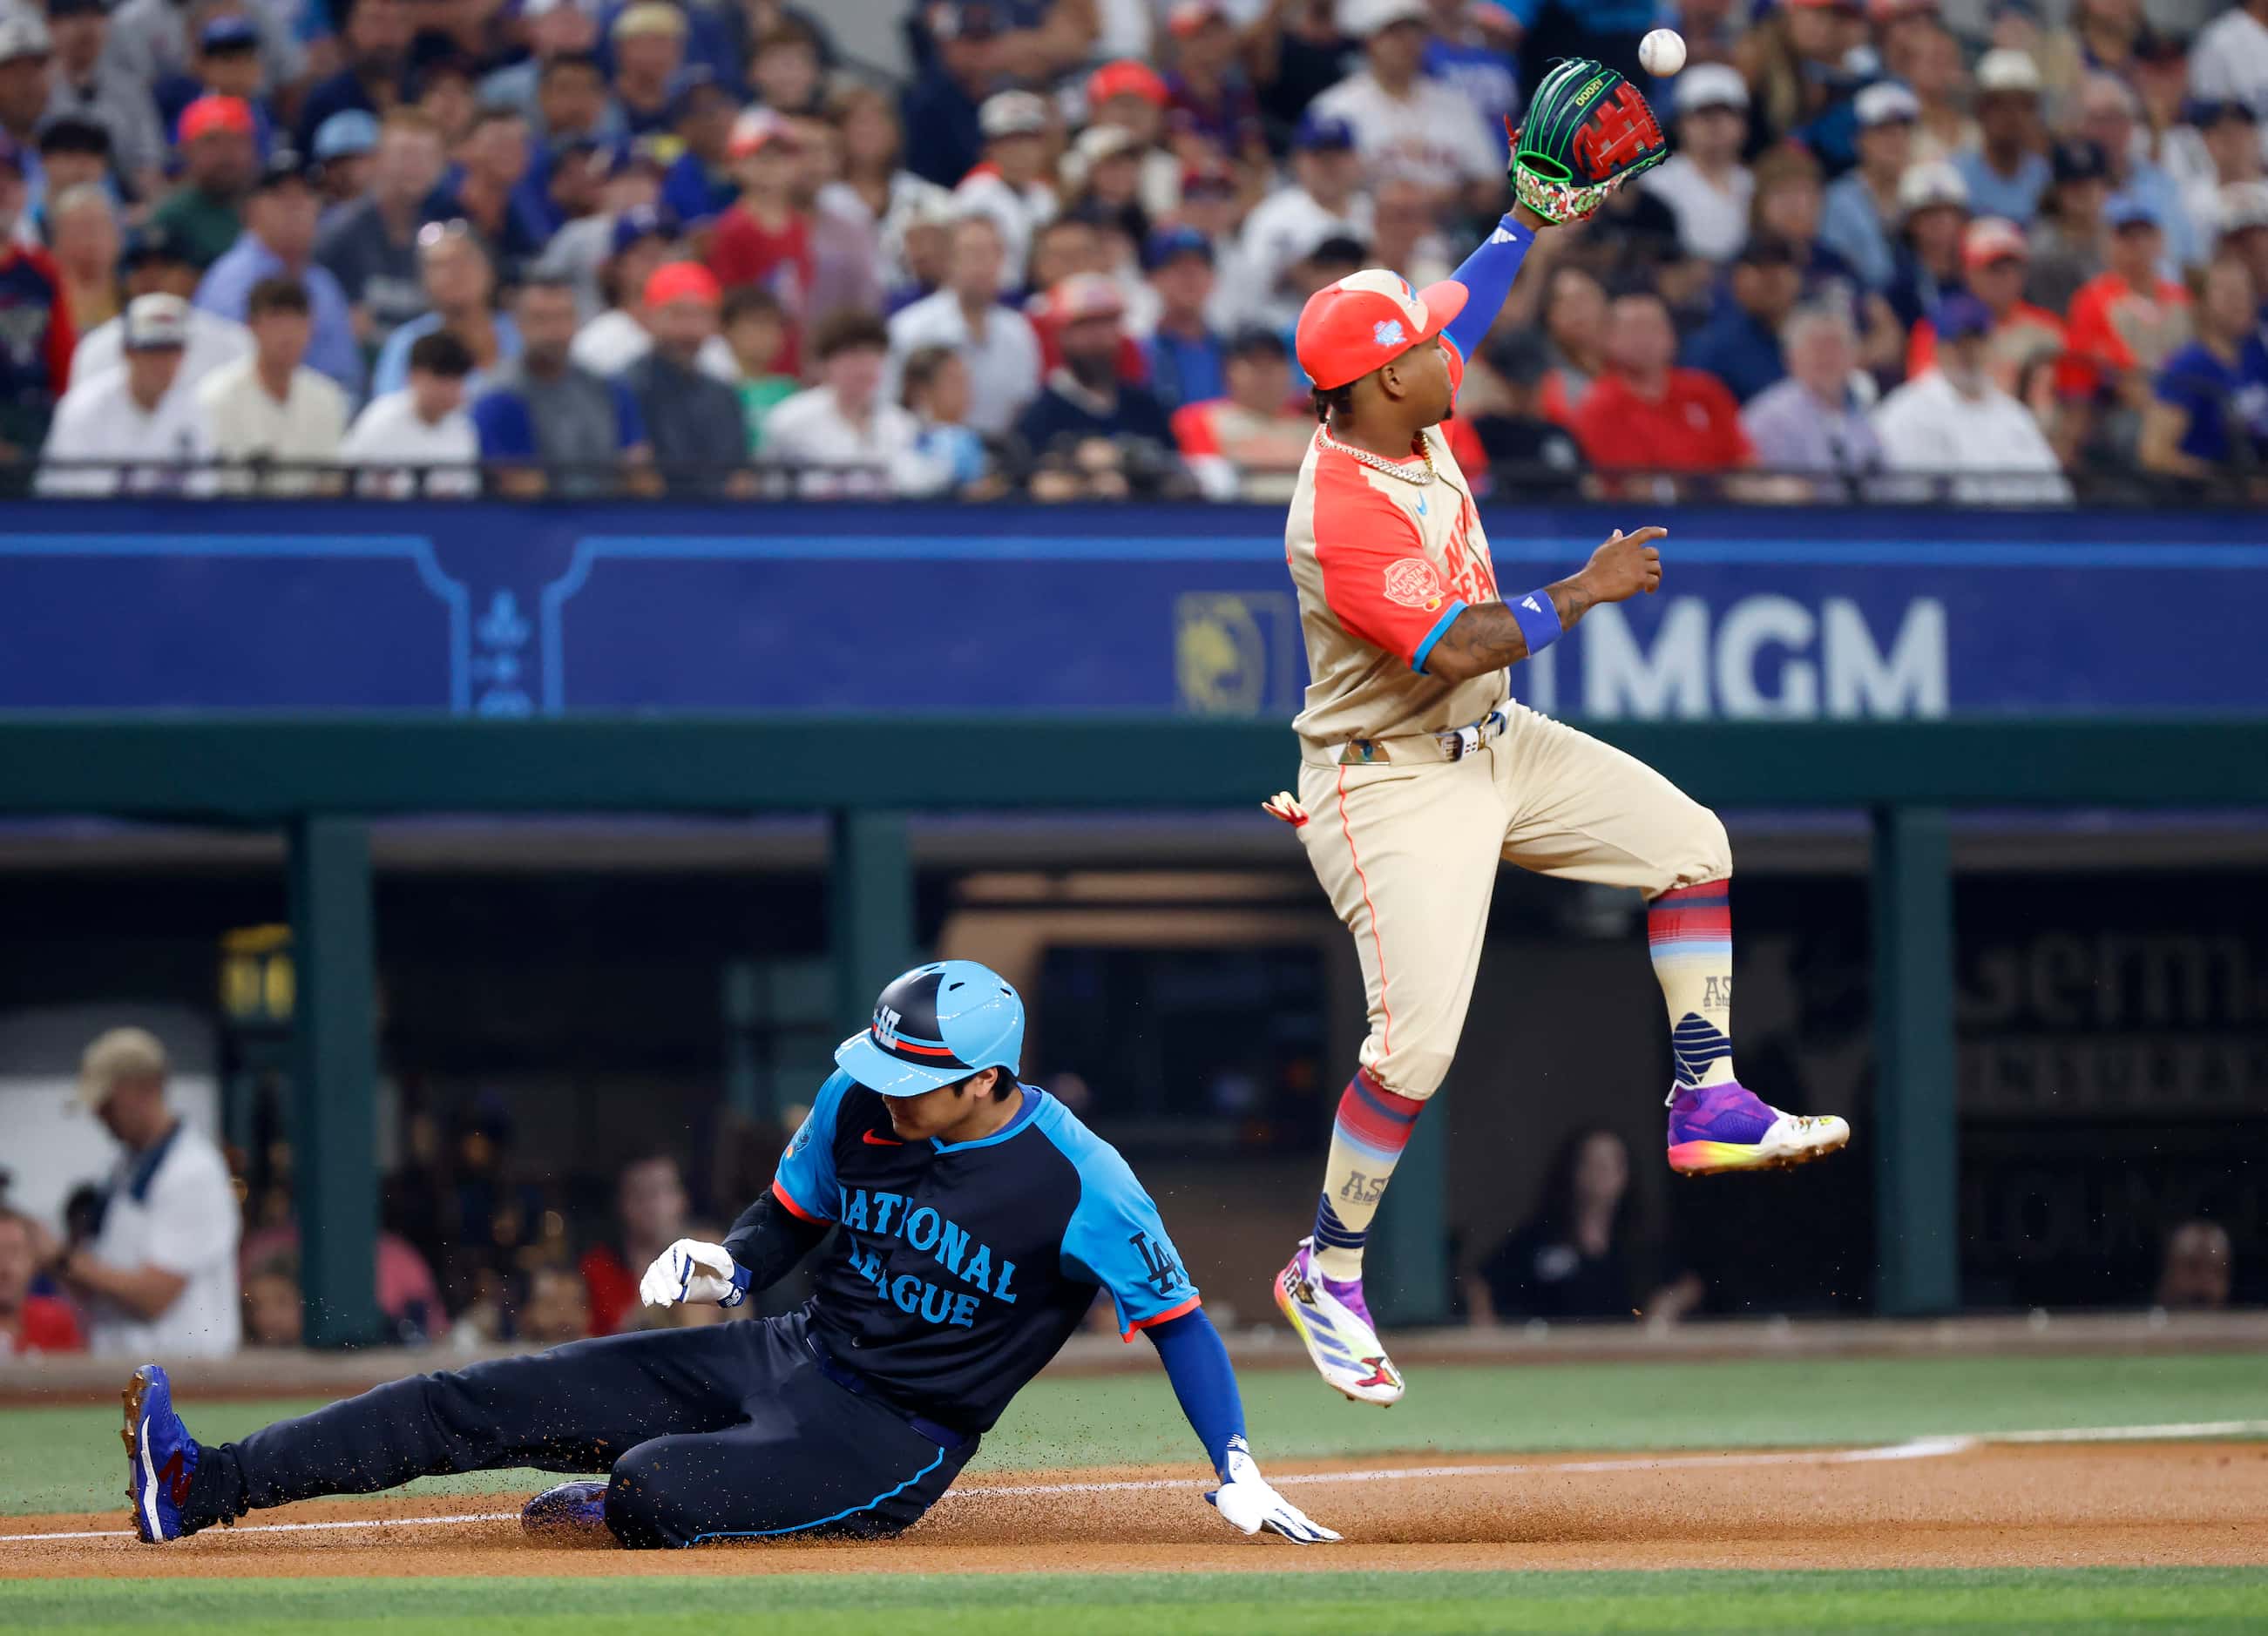 National League's Shohei Ohtani, of the Los Angeles Dodgers, slides safety into third base...